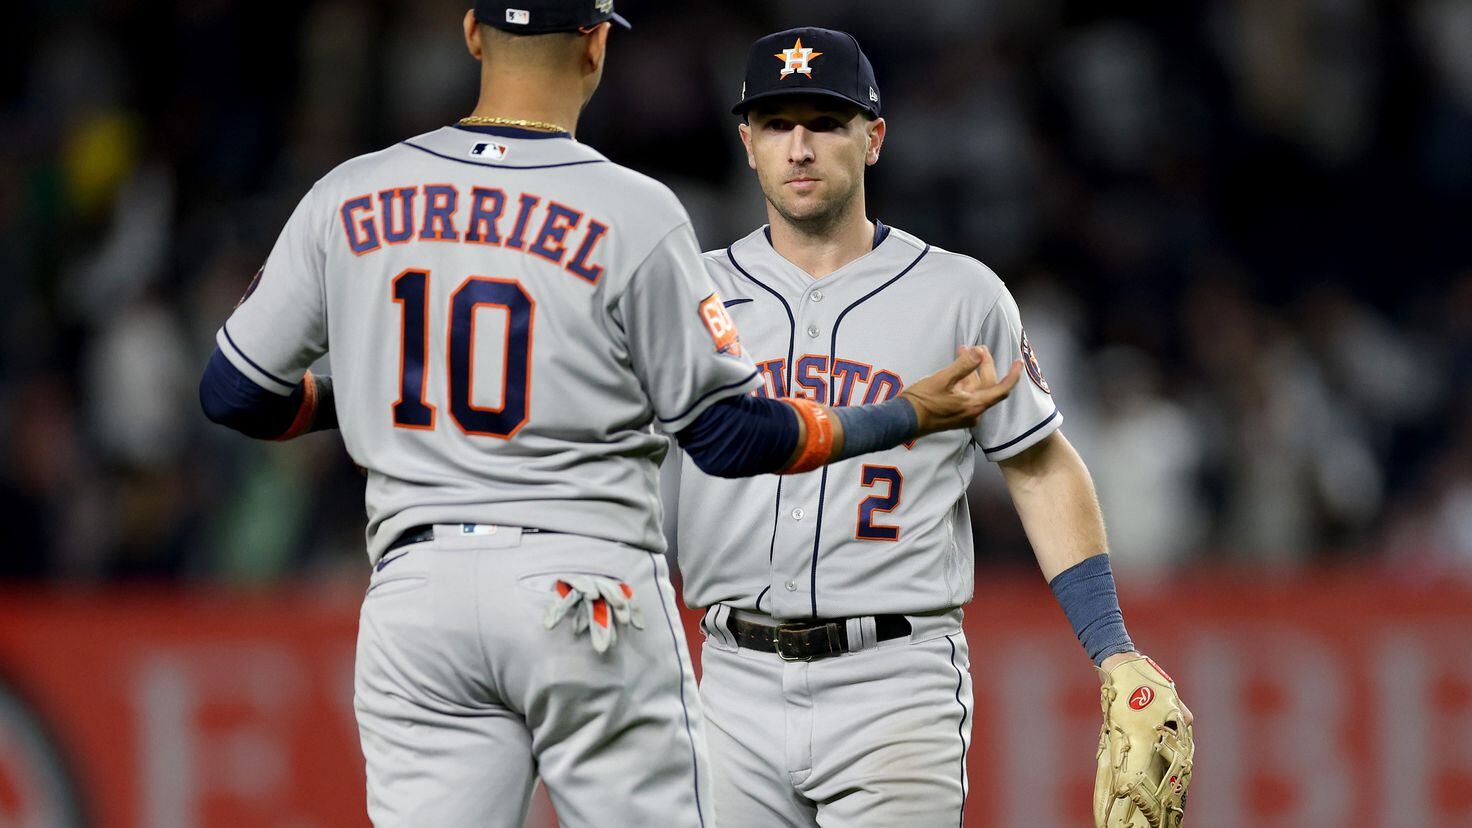 Houston Astros: Why it's a moment of redemption for Lance